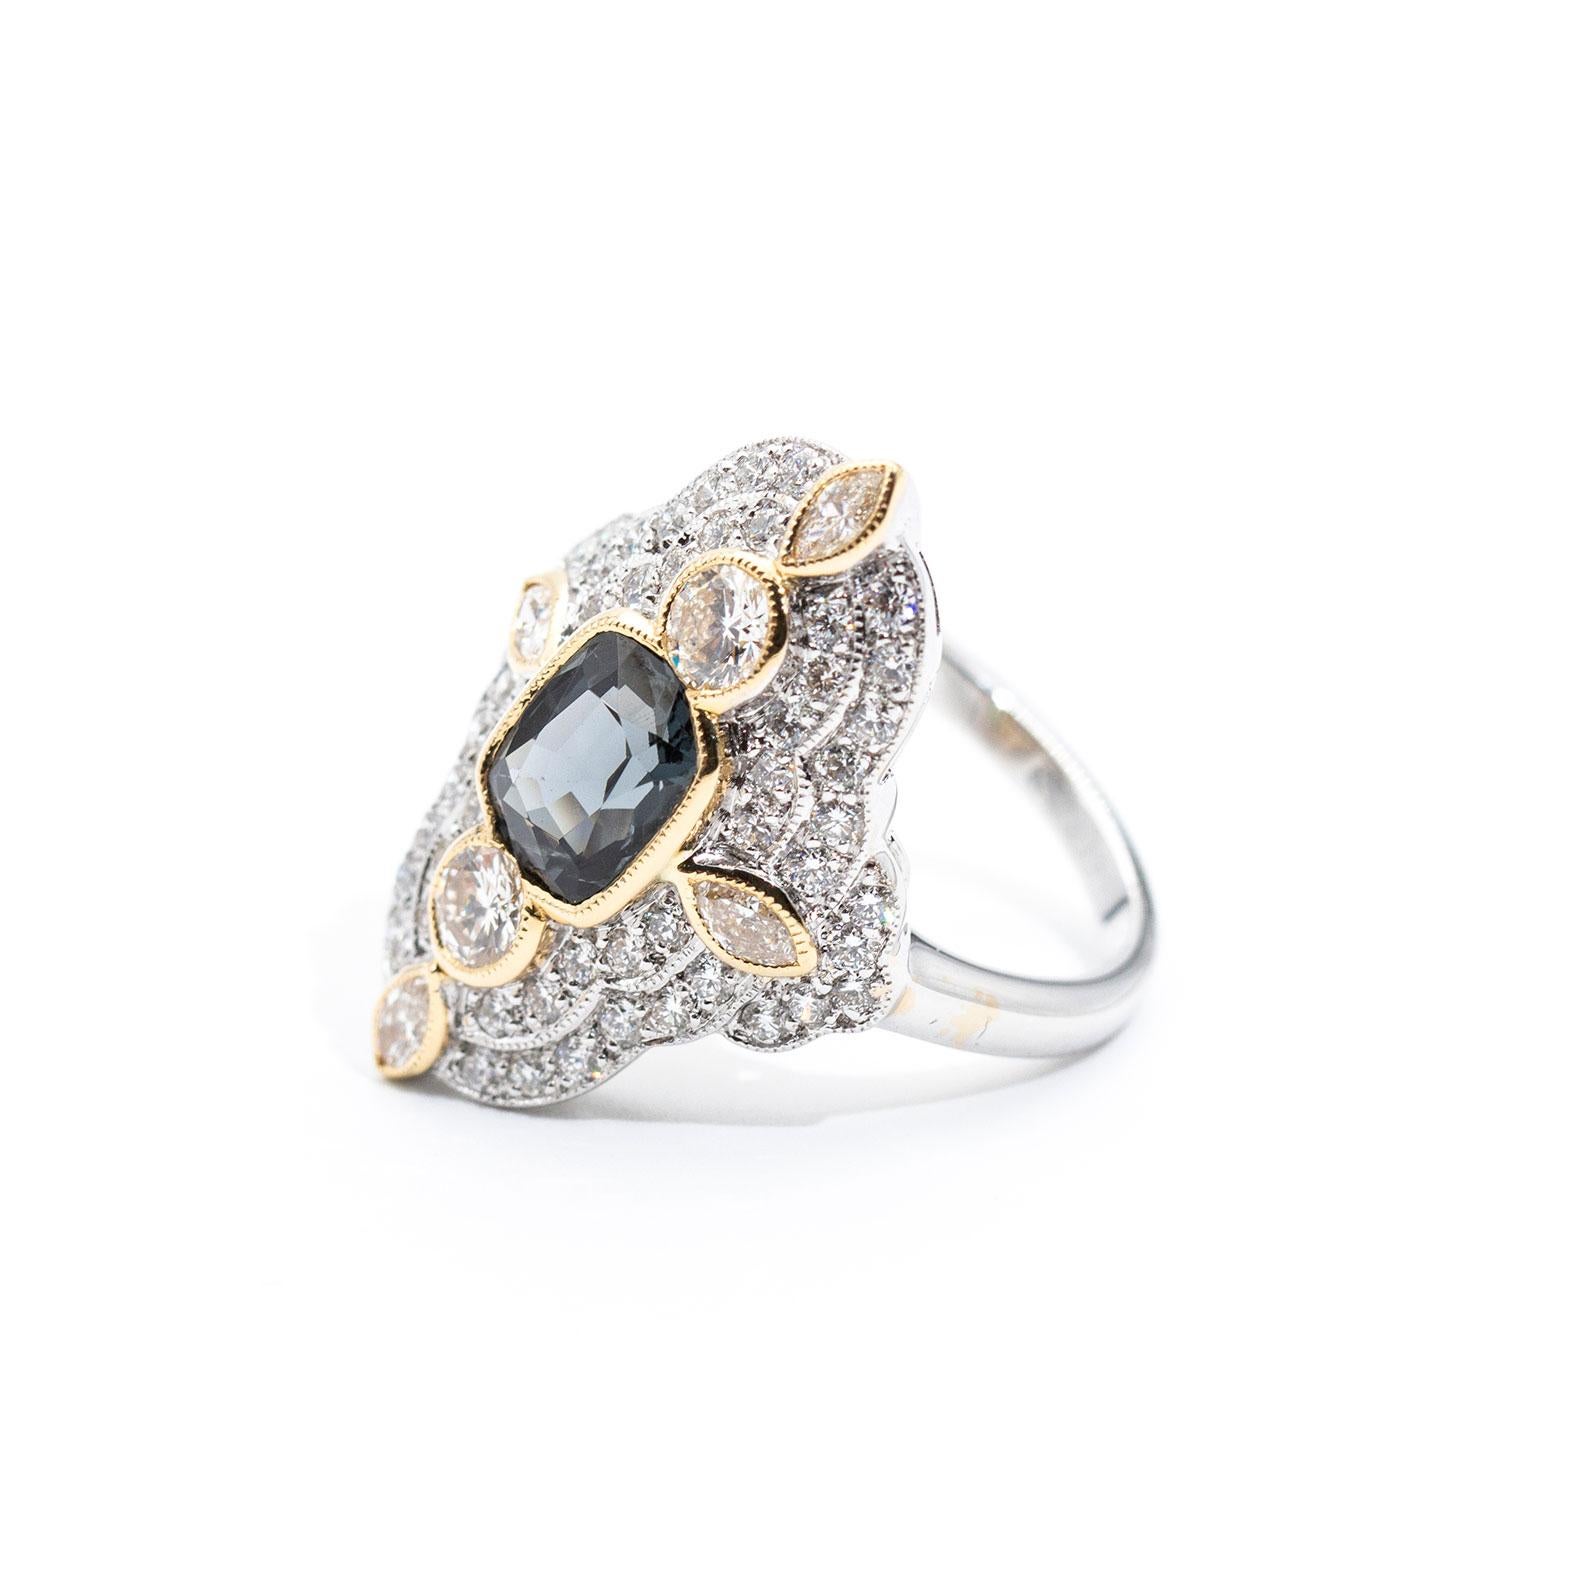 This striking vintage inspired cocktail ring is forged in 18 carat white and yellow gold and features a central beautiful bright 1.98 carat greyish blue natural cushion cut spinel. The spinel is surrounded by an alluring border of 1.54 carats of